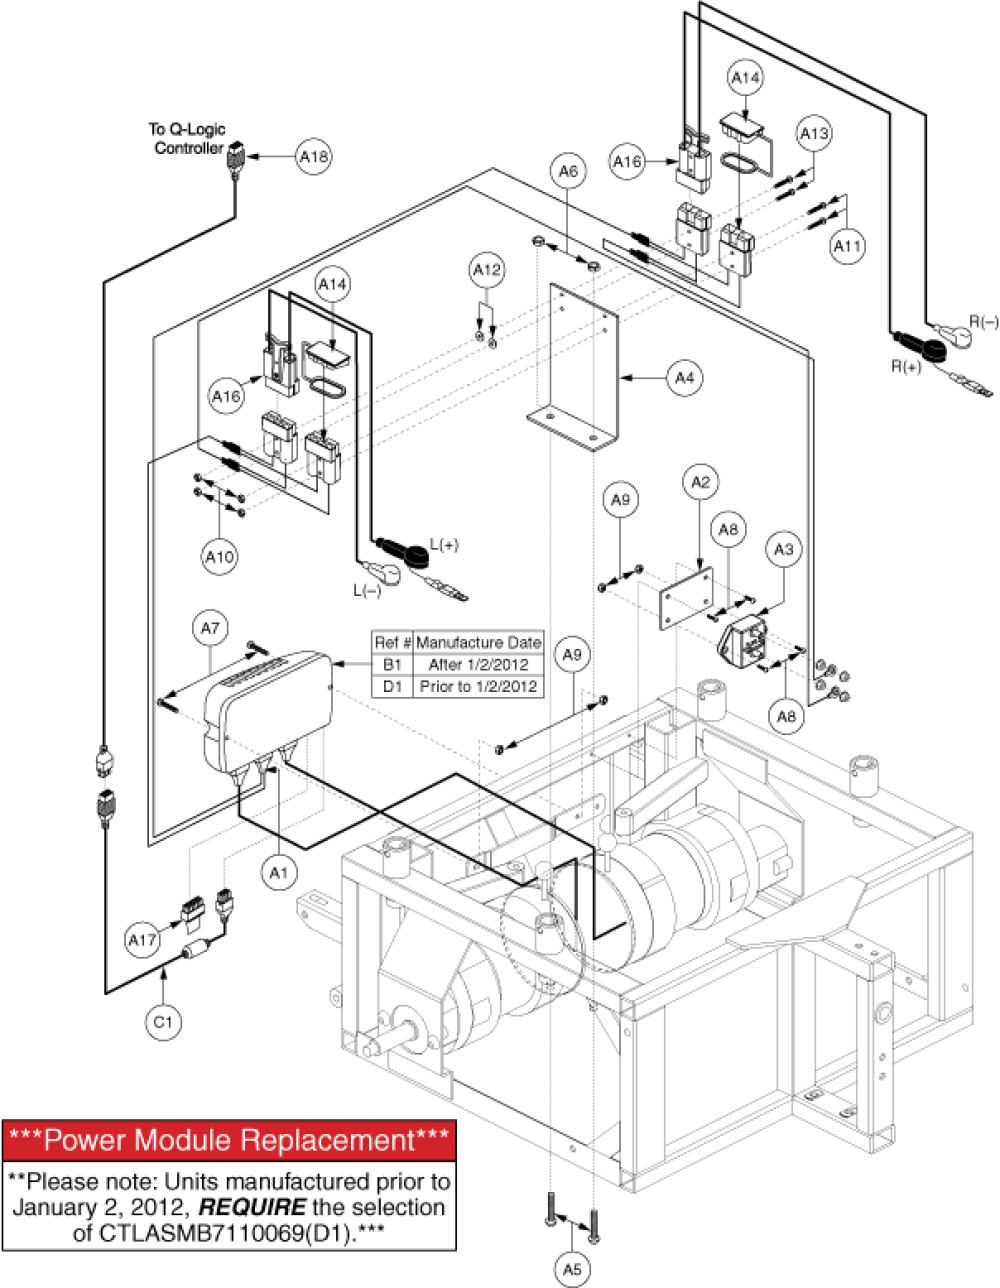 Utility Tray Assembly - Q-logic, 2-battery parts diagram